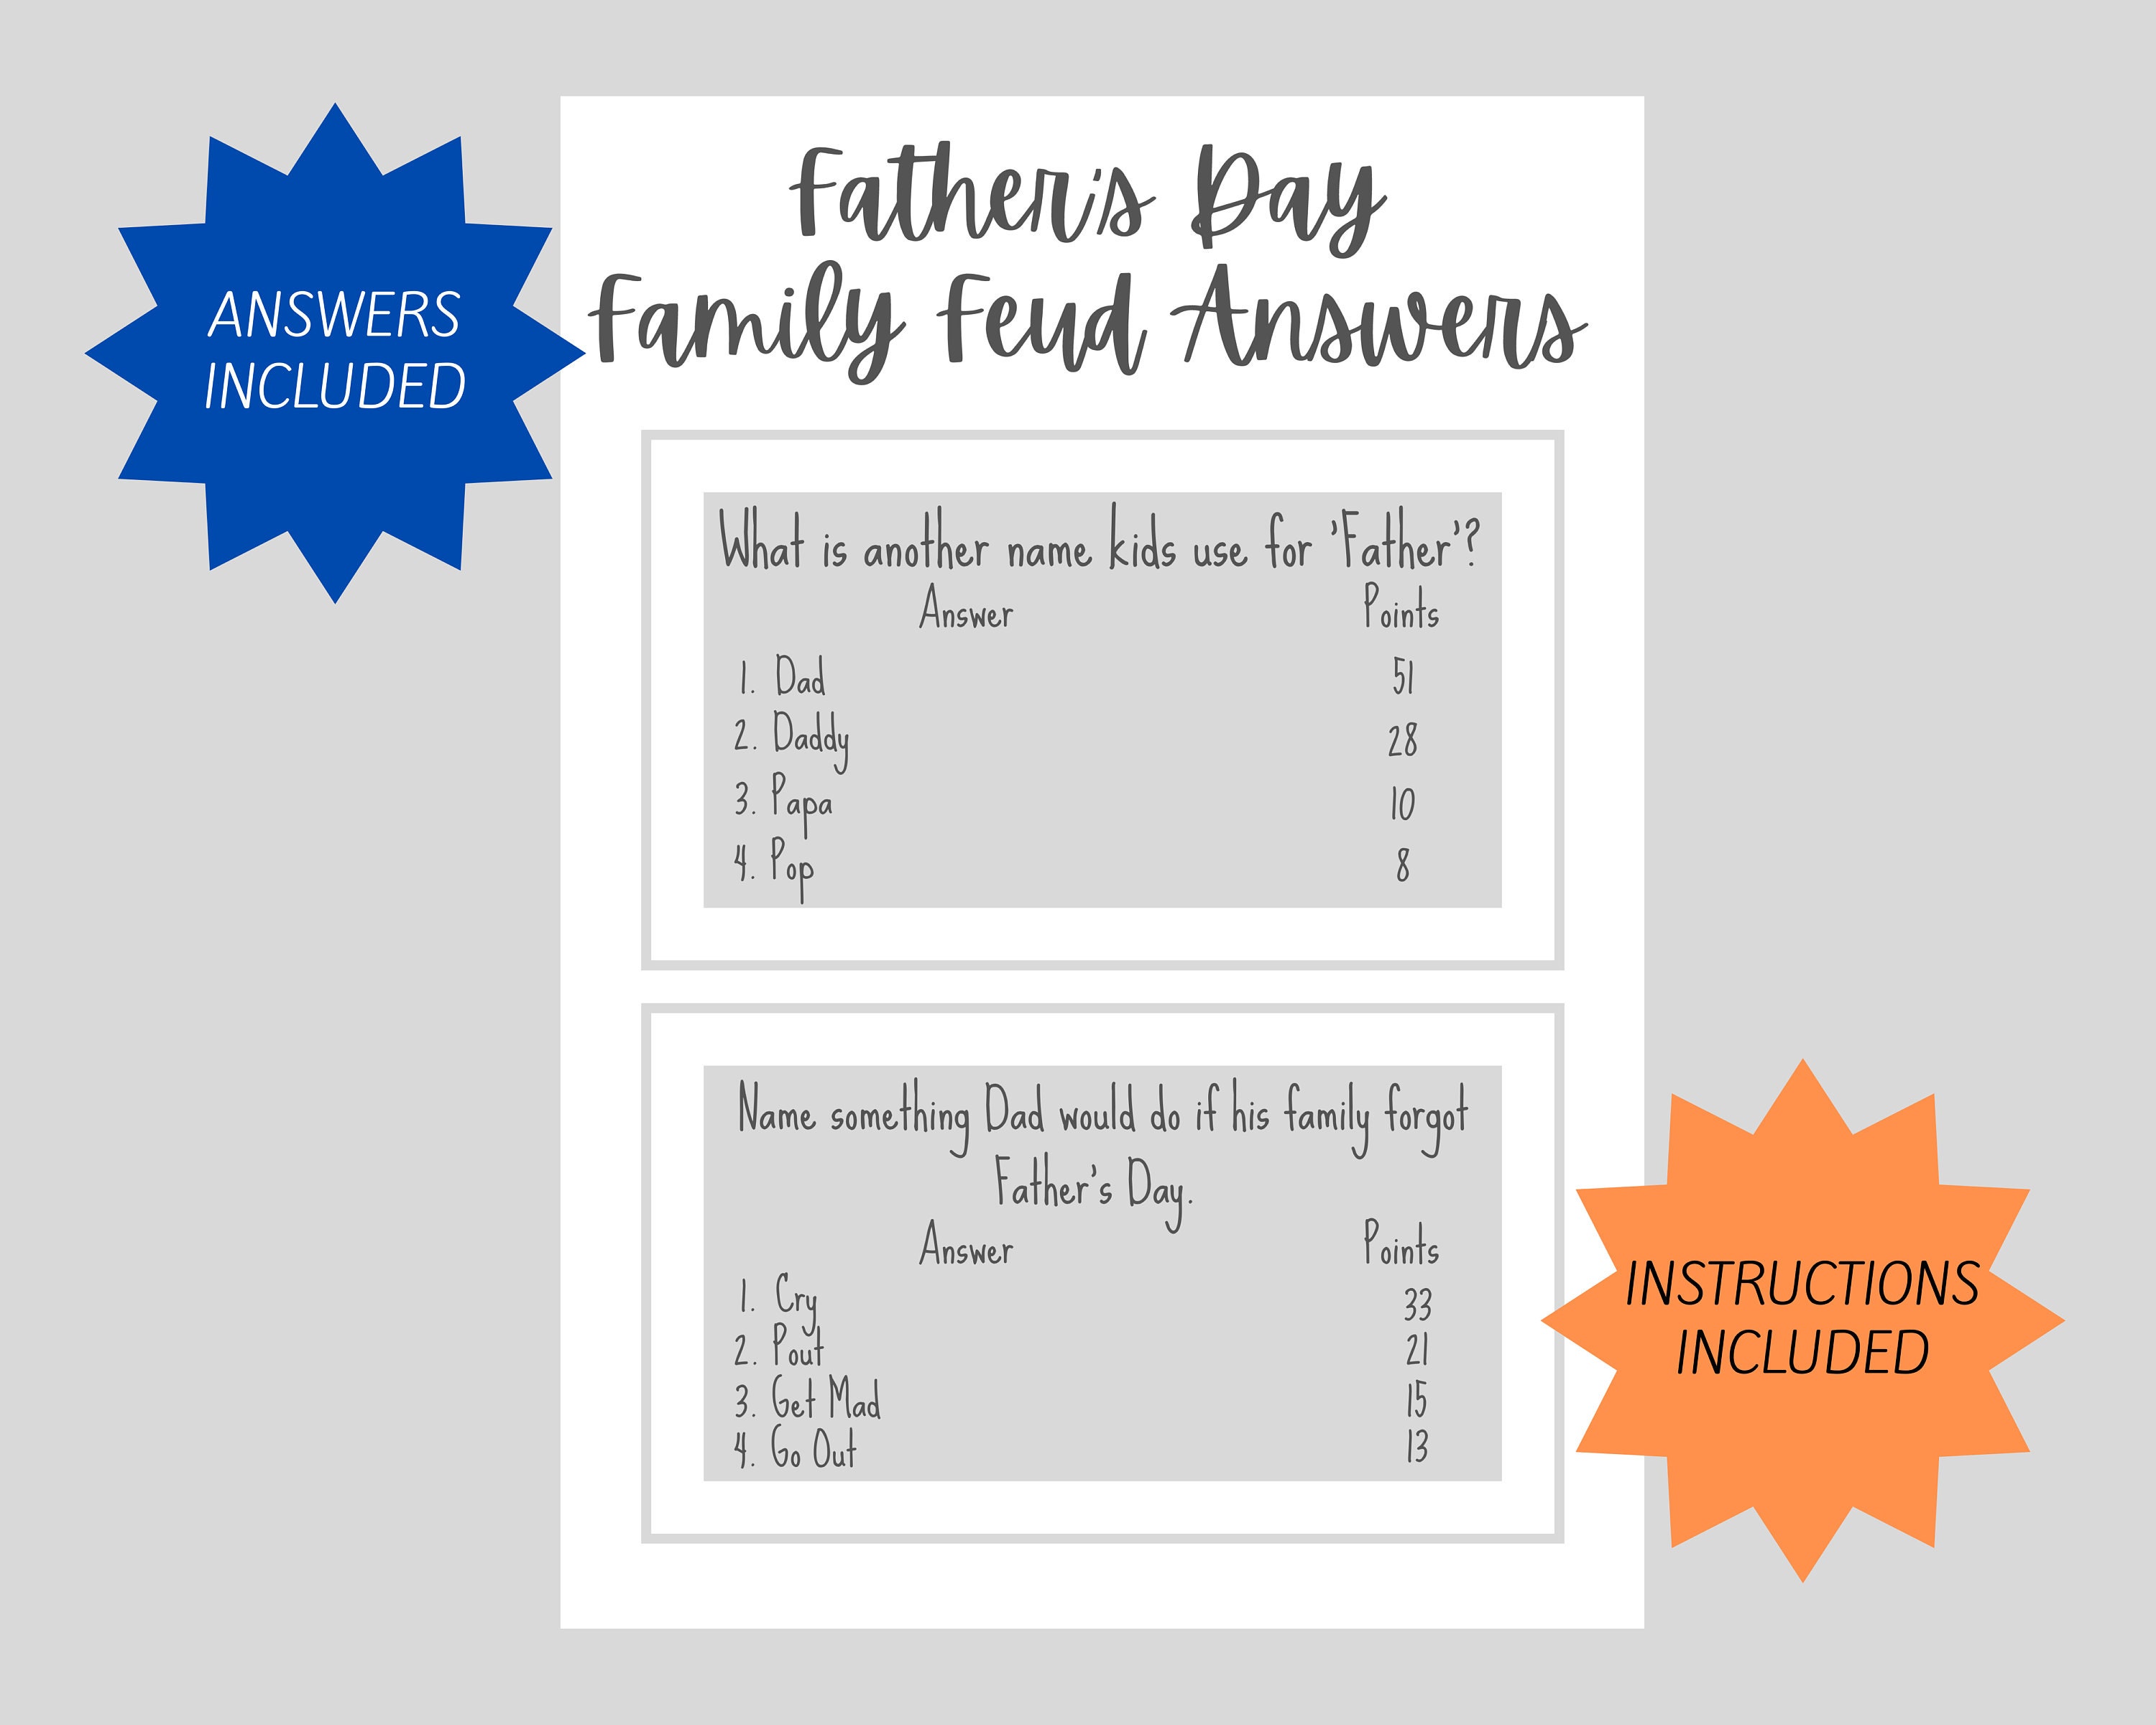 Father's Day Feud Printable Game Fun Family Activity for -  Portugal